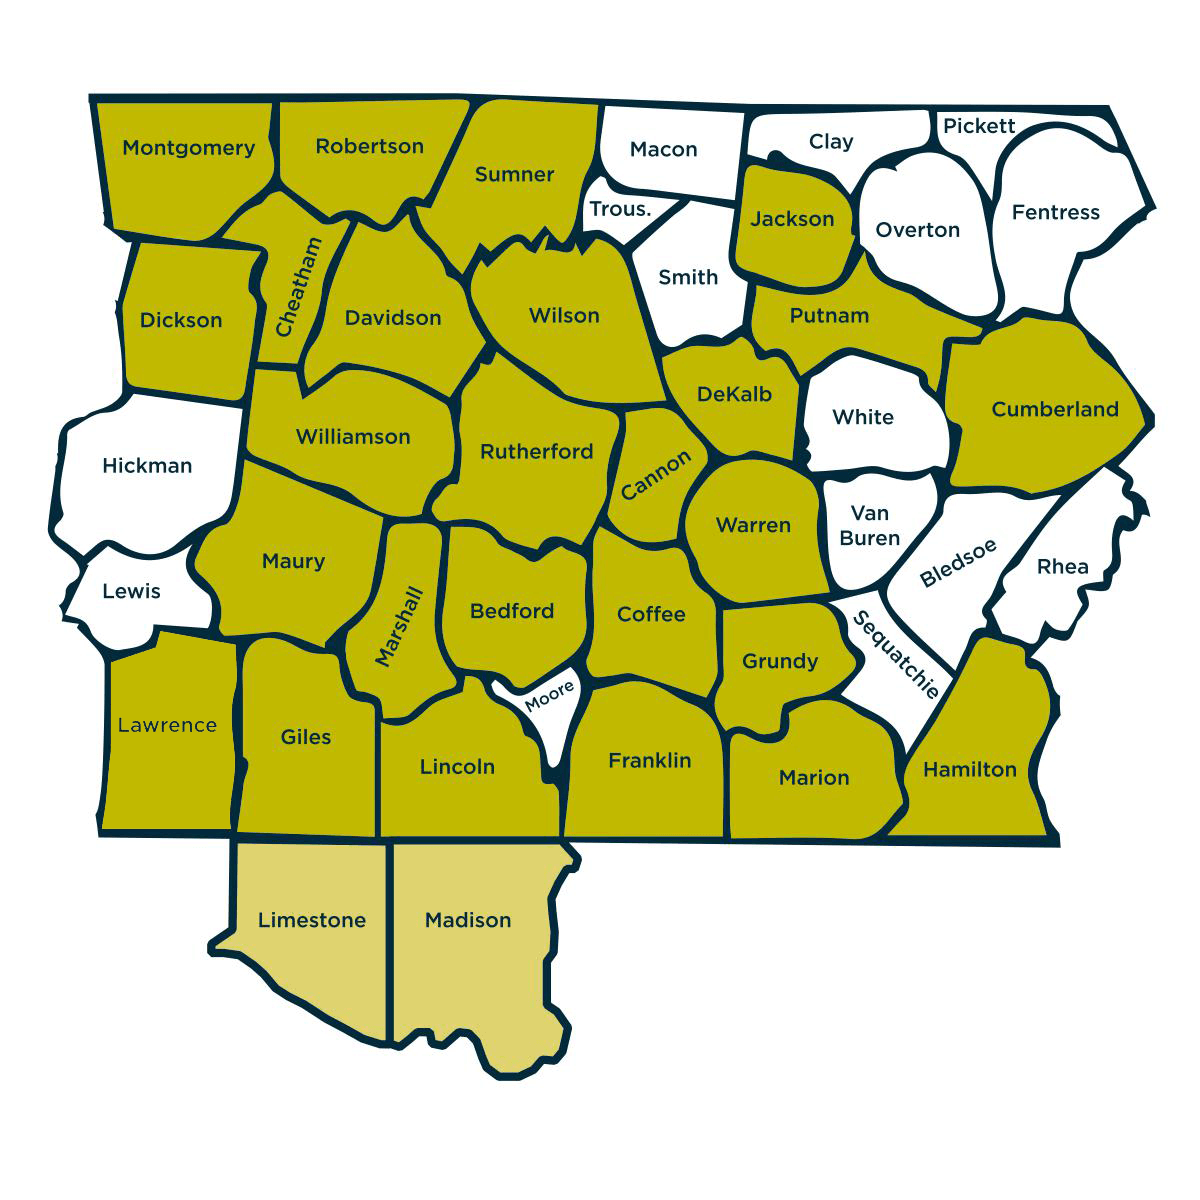 Clickable map of Tennessee